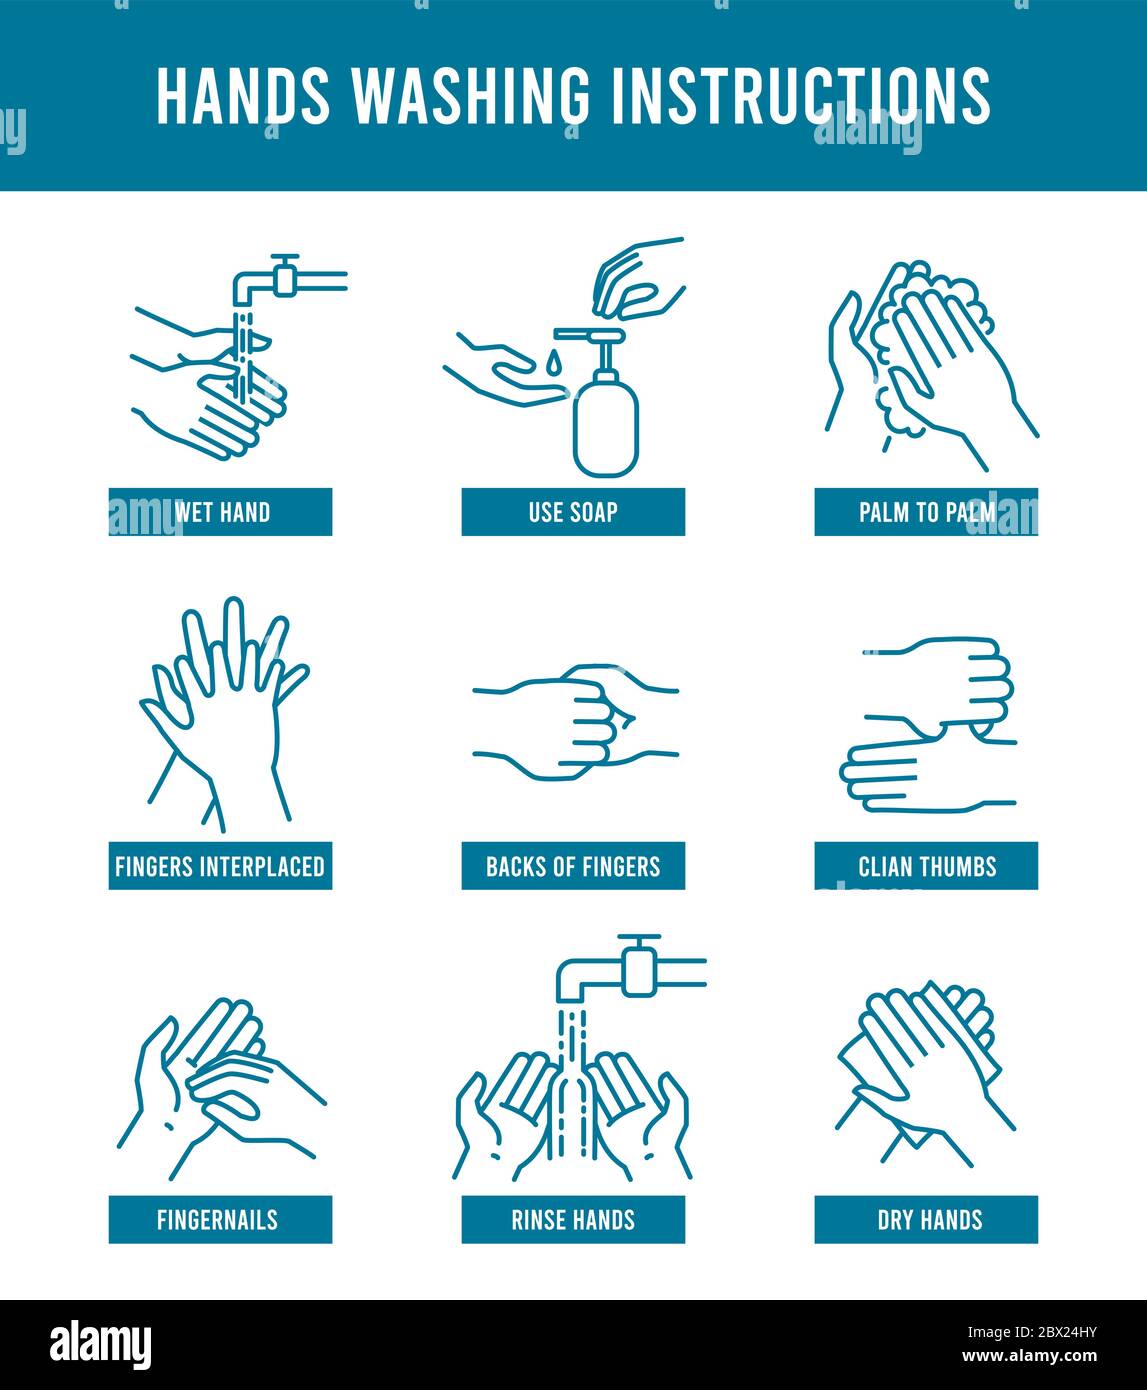 Hand washing instruction. Step by step tutorial how to wash dirty hands. Health protection, prevent virus and hand hygiene poster vector illustration Stock Vector